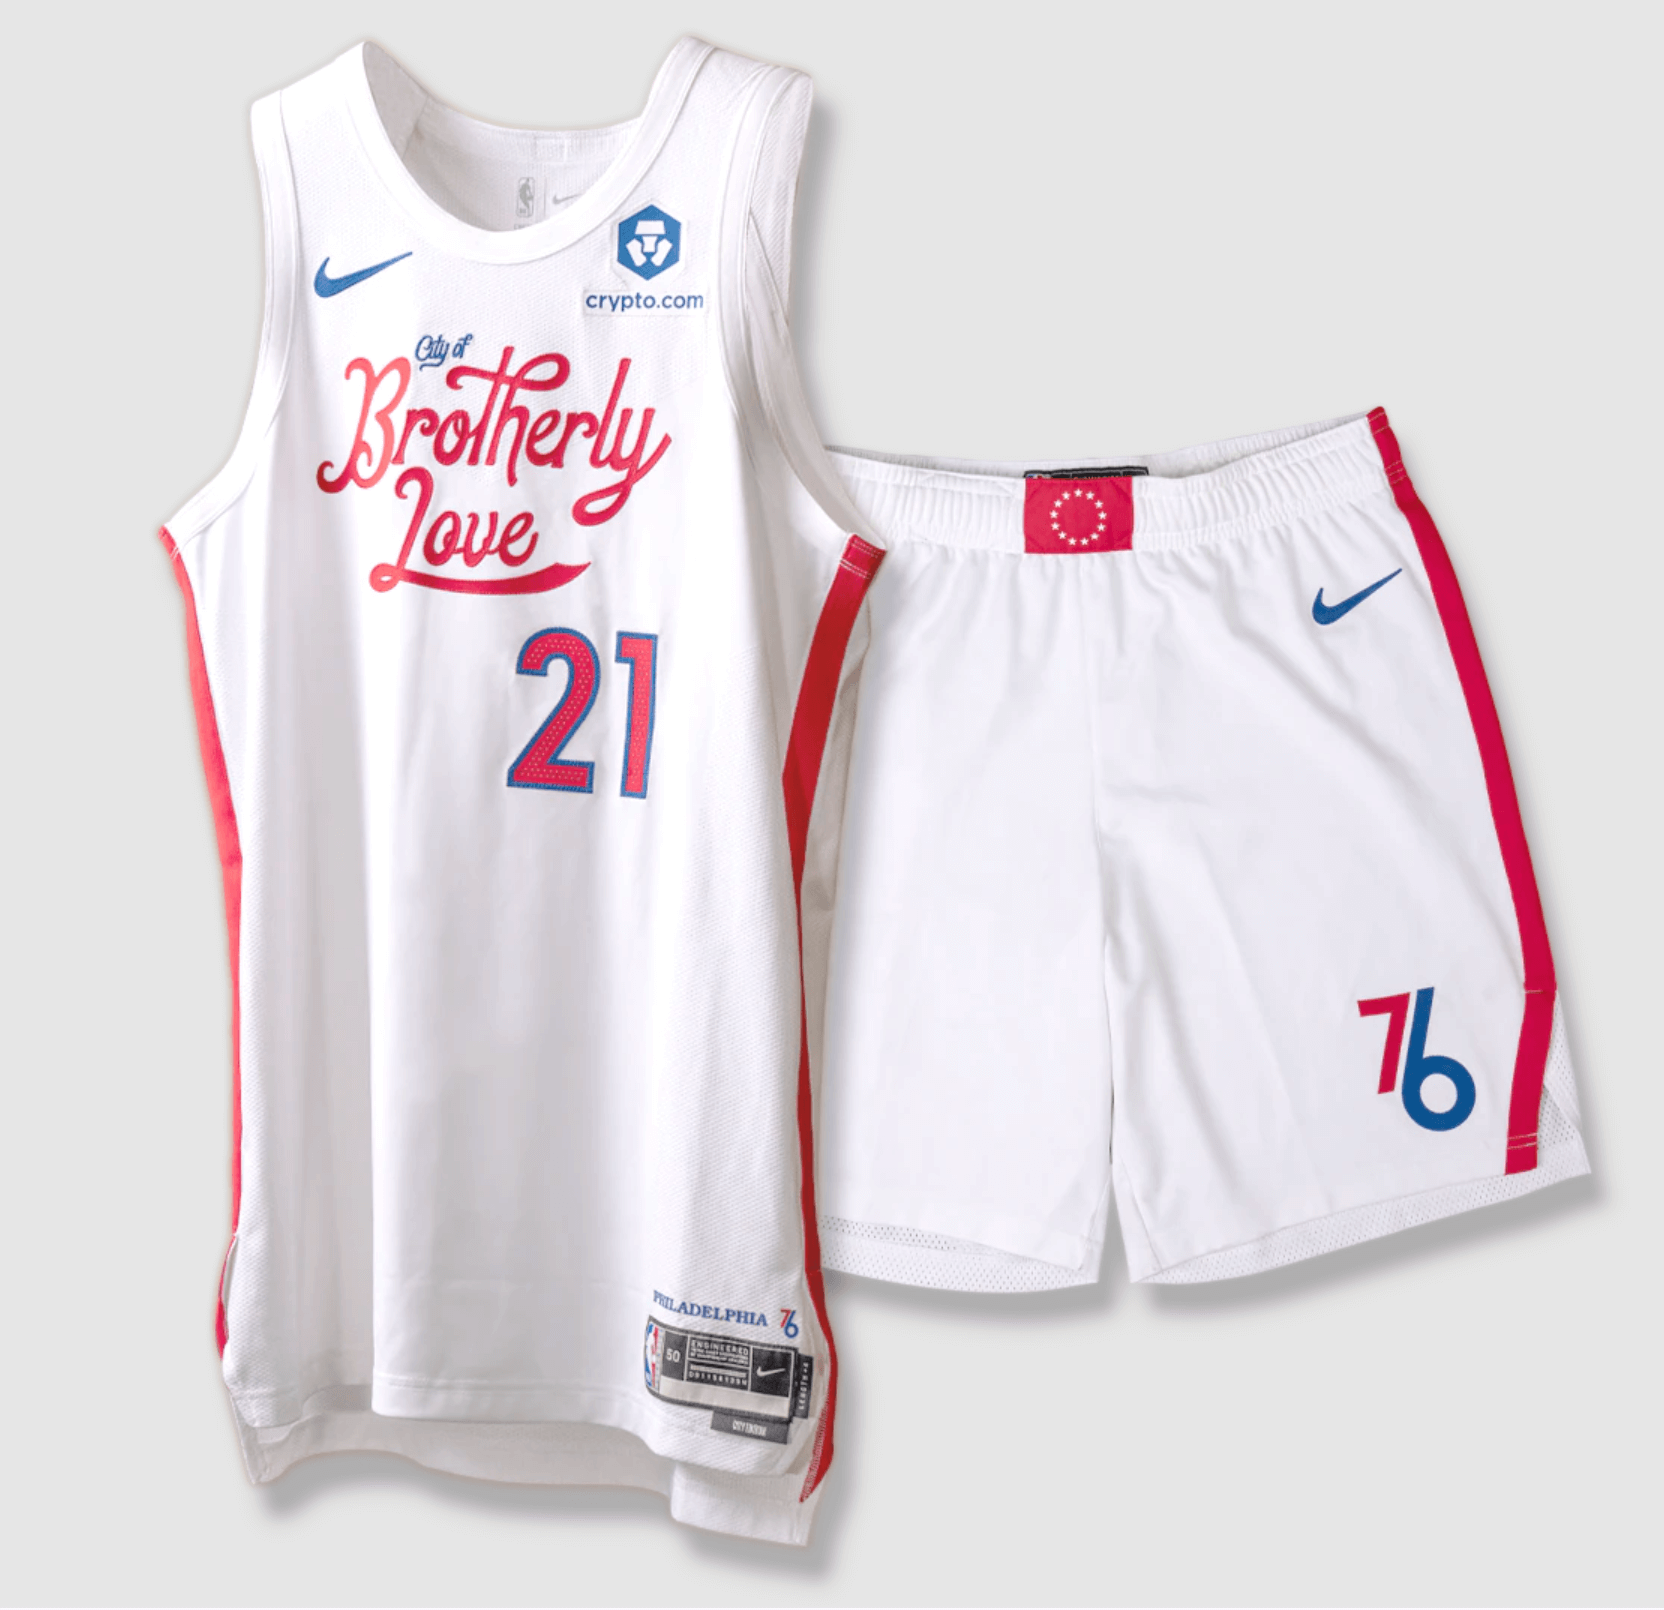 Let's Take a Look at the NBA's New City Edition Uniforms